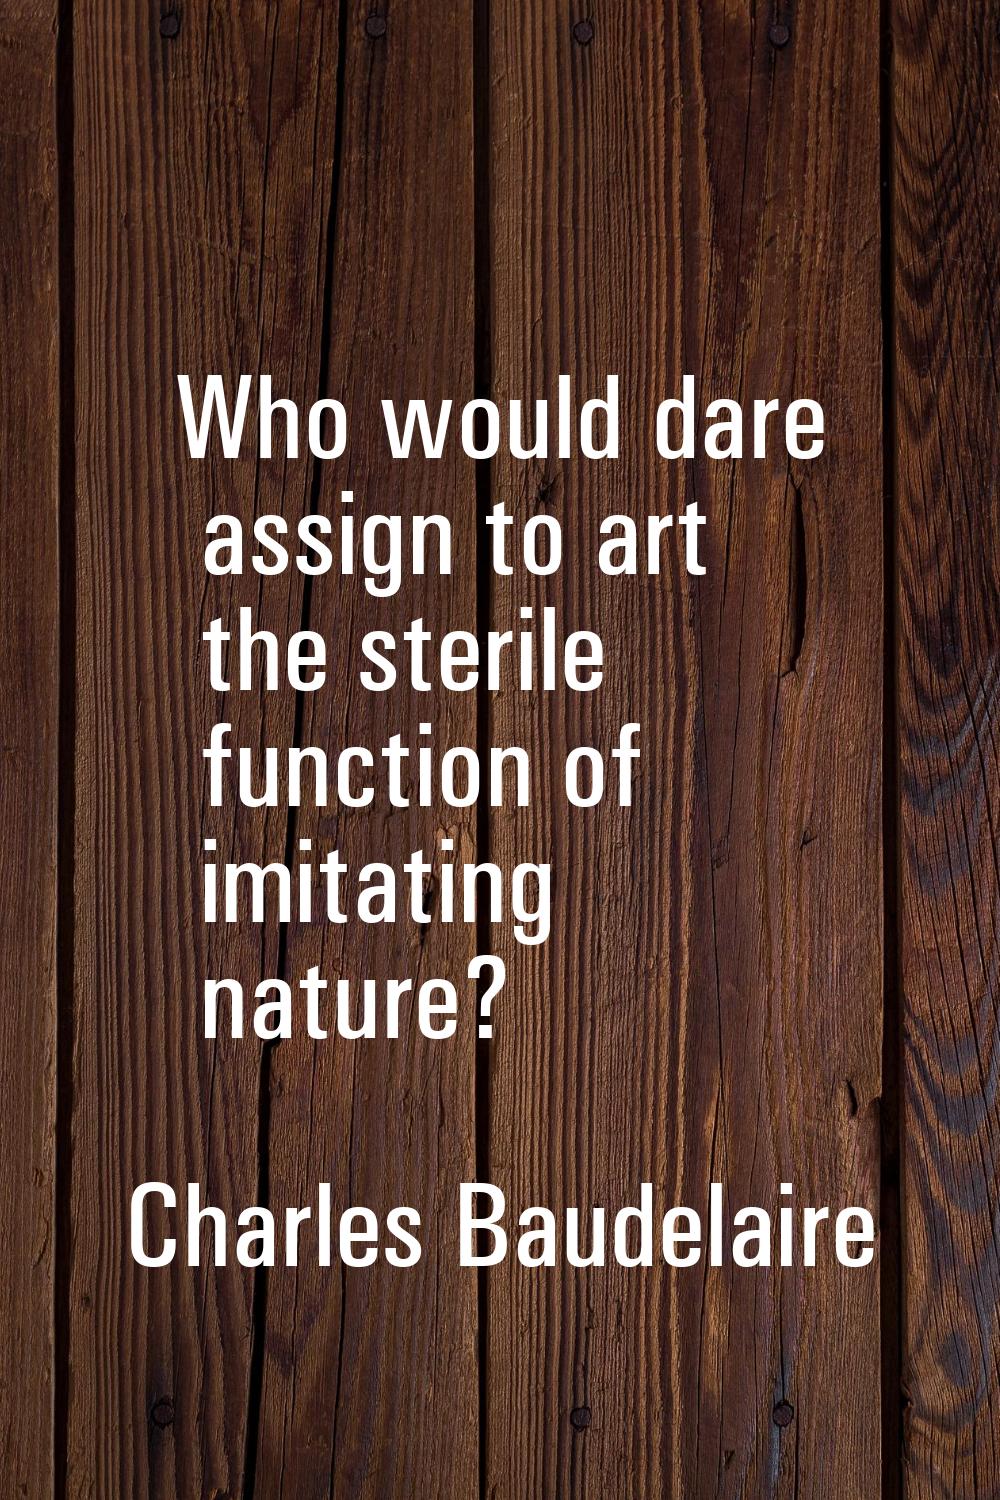 Who would dare assign to art the sterile function of imitating nature?